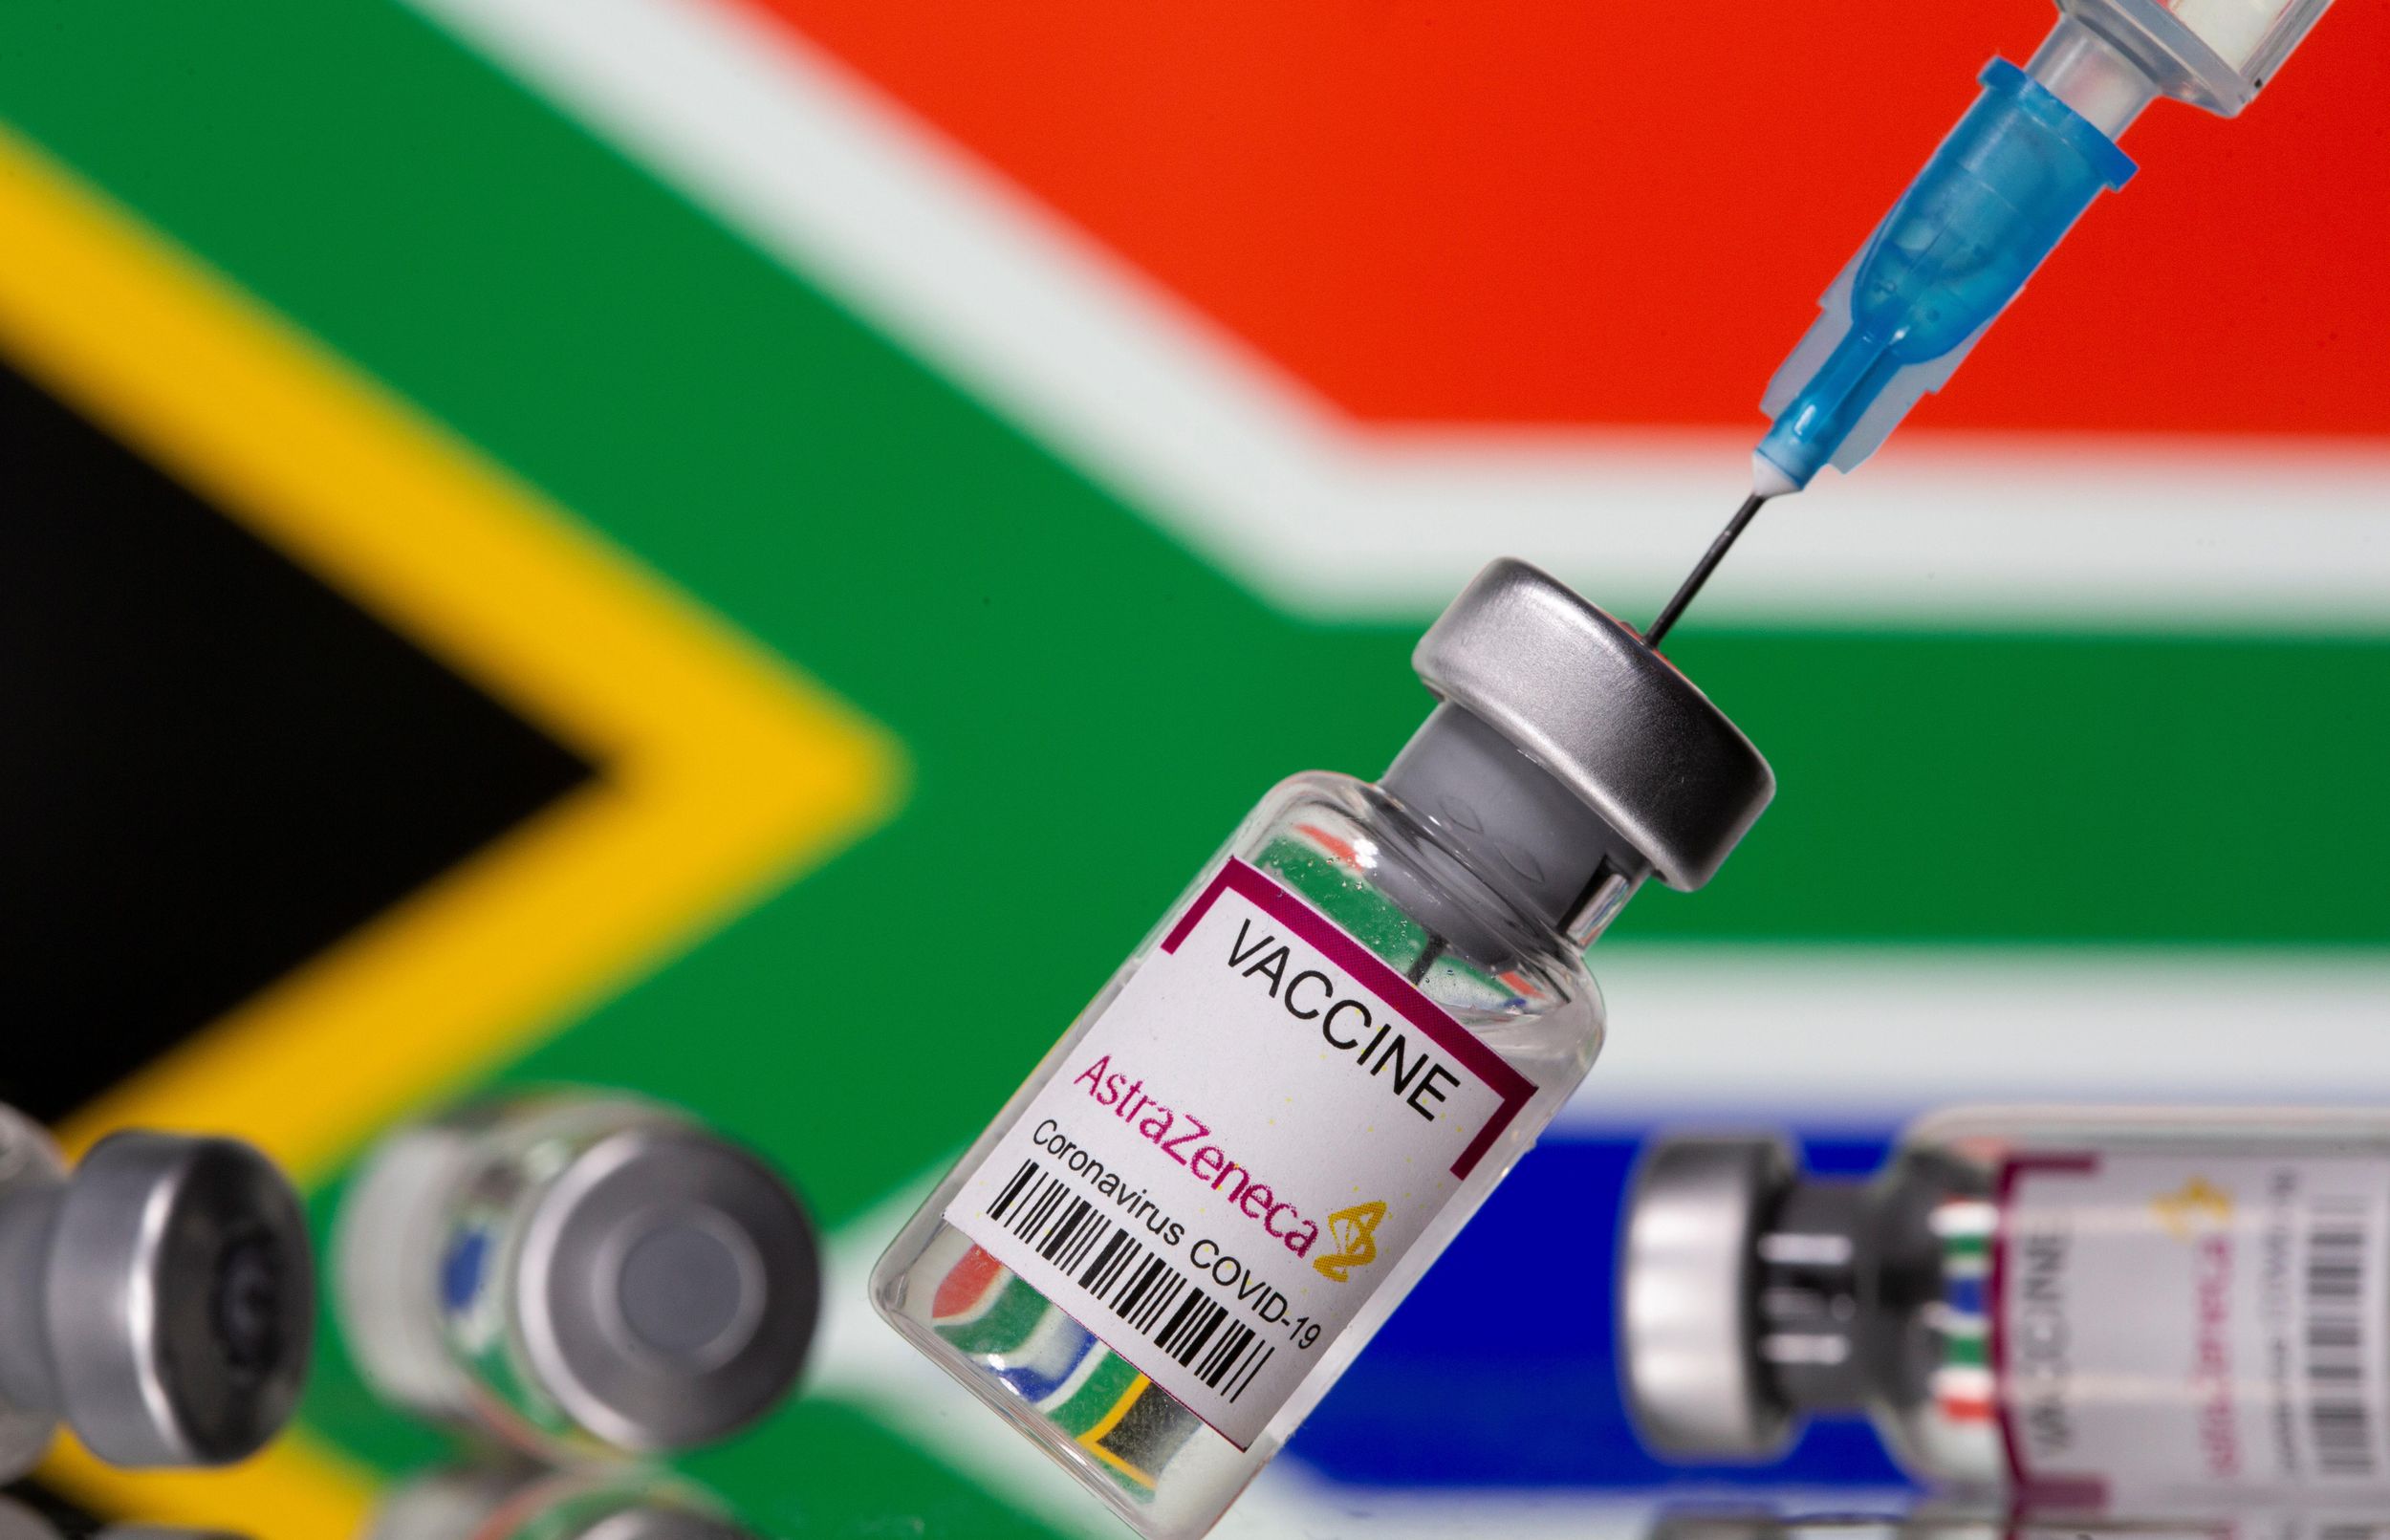 Vials labelled "Astra Zeneca COVID-19 Coronavirus Vaccine" and a syringe are seen in front of a displayed South Africa flag, in this illustration photo taken March 14, 2021.